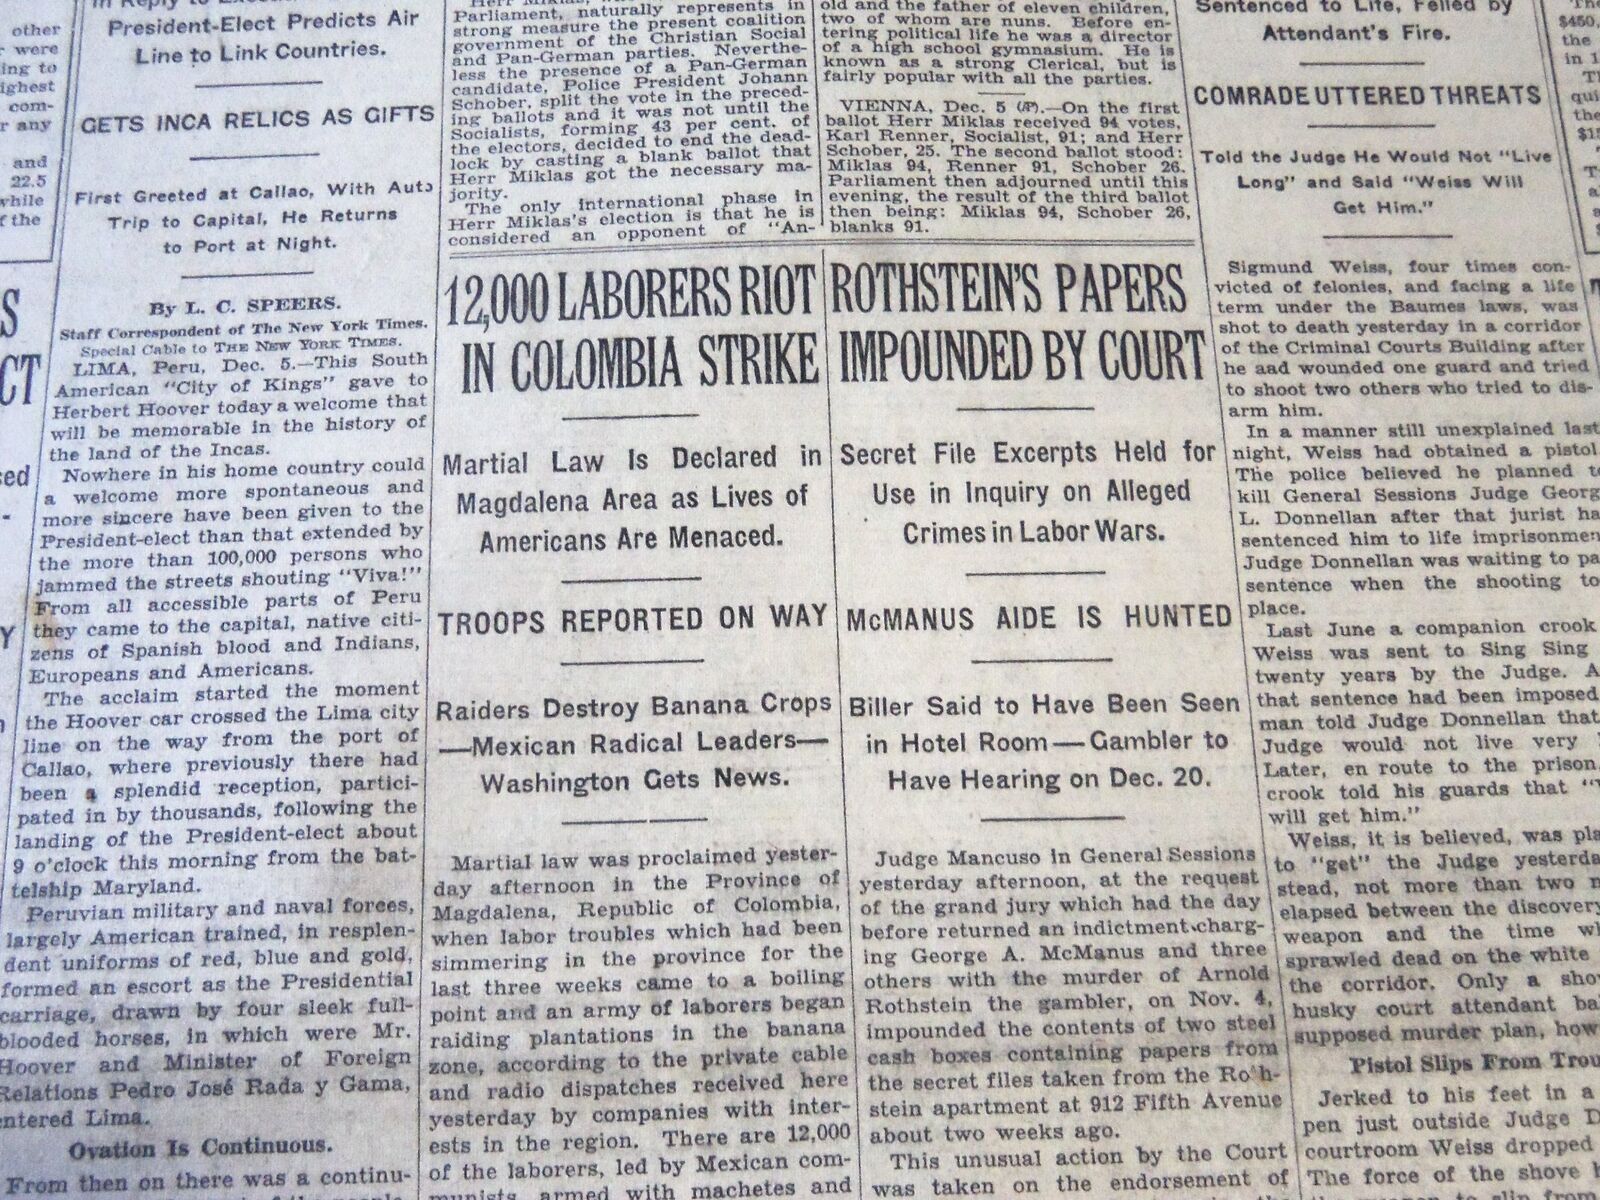 1928 DEC 6 NEW YORK TIMES - ROTHSTEIN'S PAPERS IMPOUNDED BY COURT - NT 6512